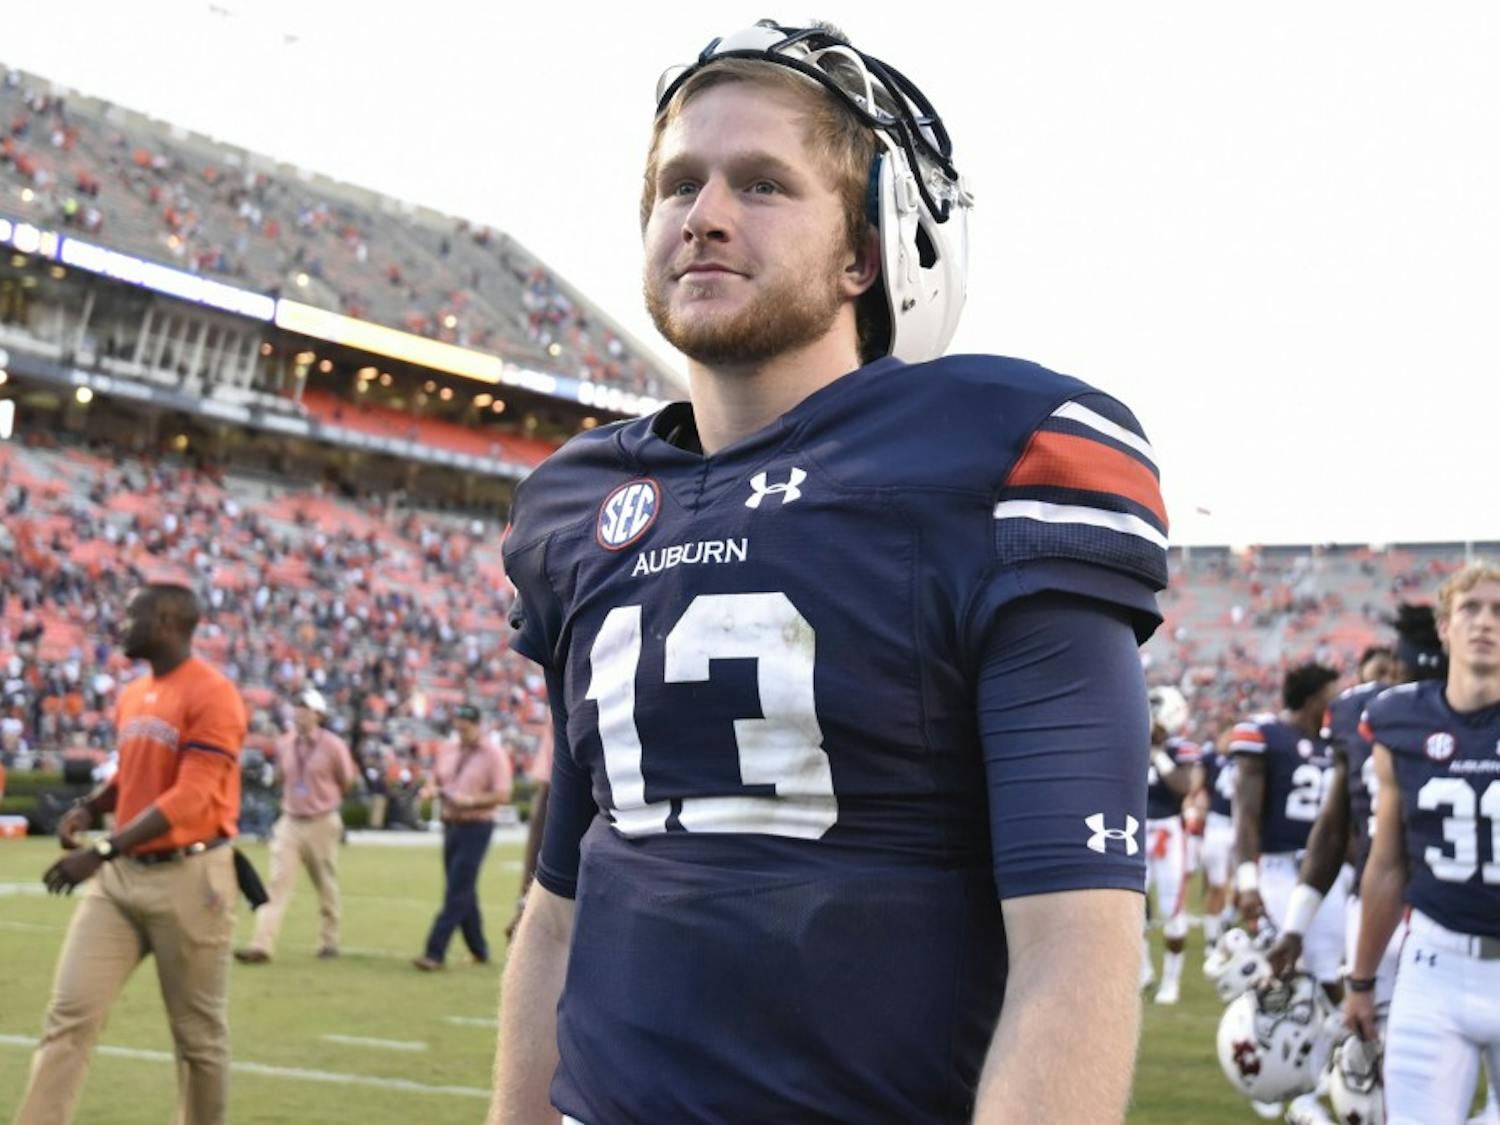 Sean White (13) walks off the field after Auburn's 58 to 7 victory over ULM, Saturday, Oct. 1, 2016, in Auburn, Ala.